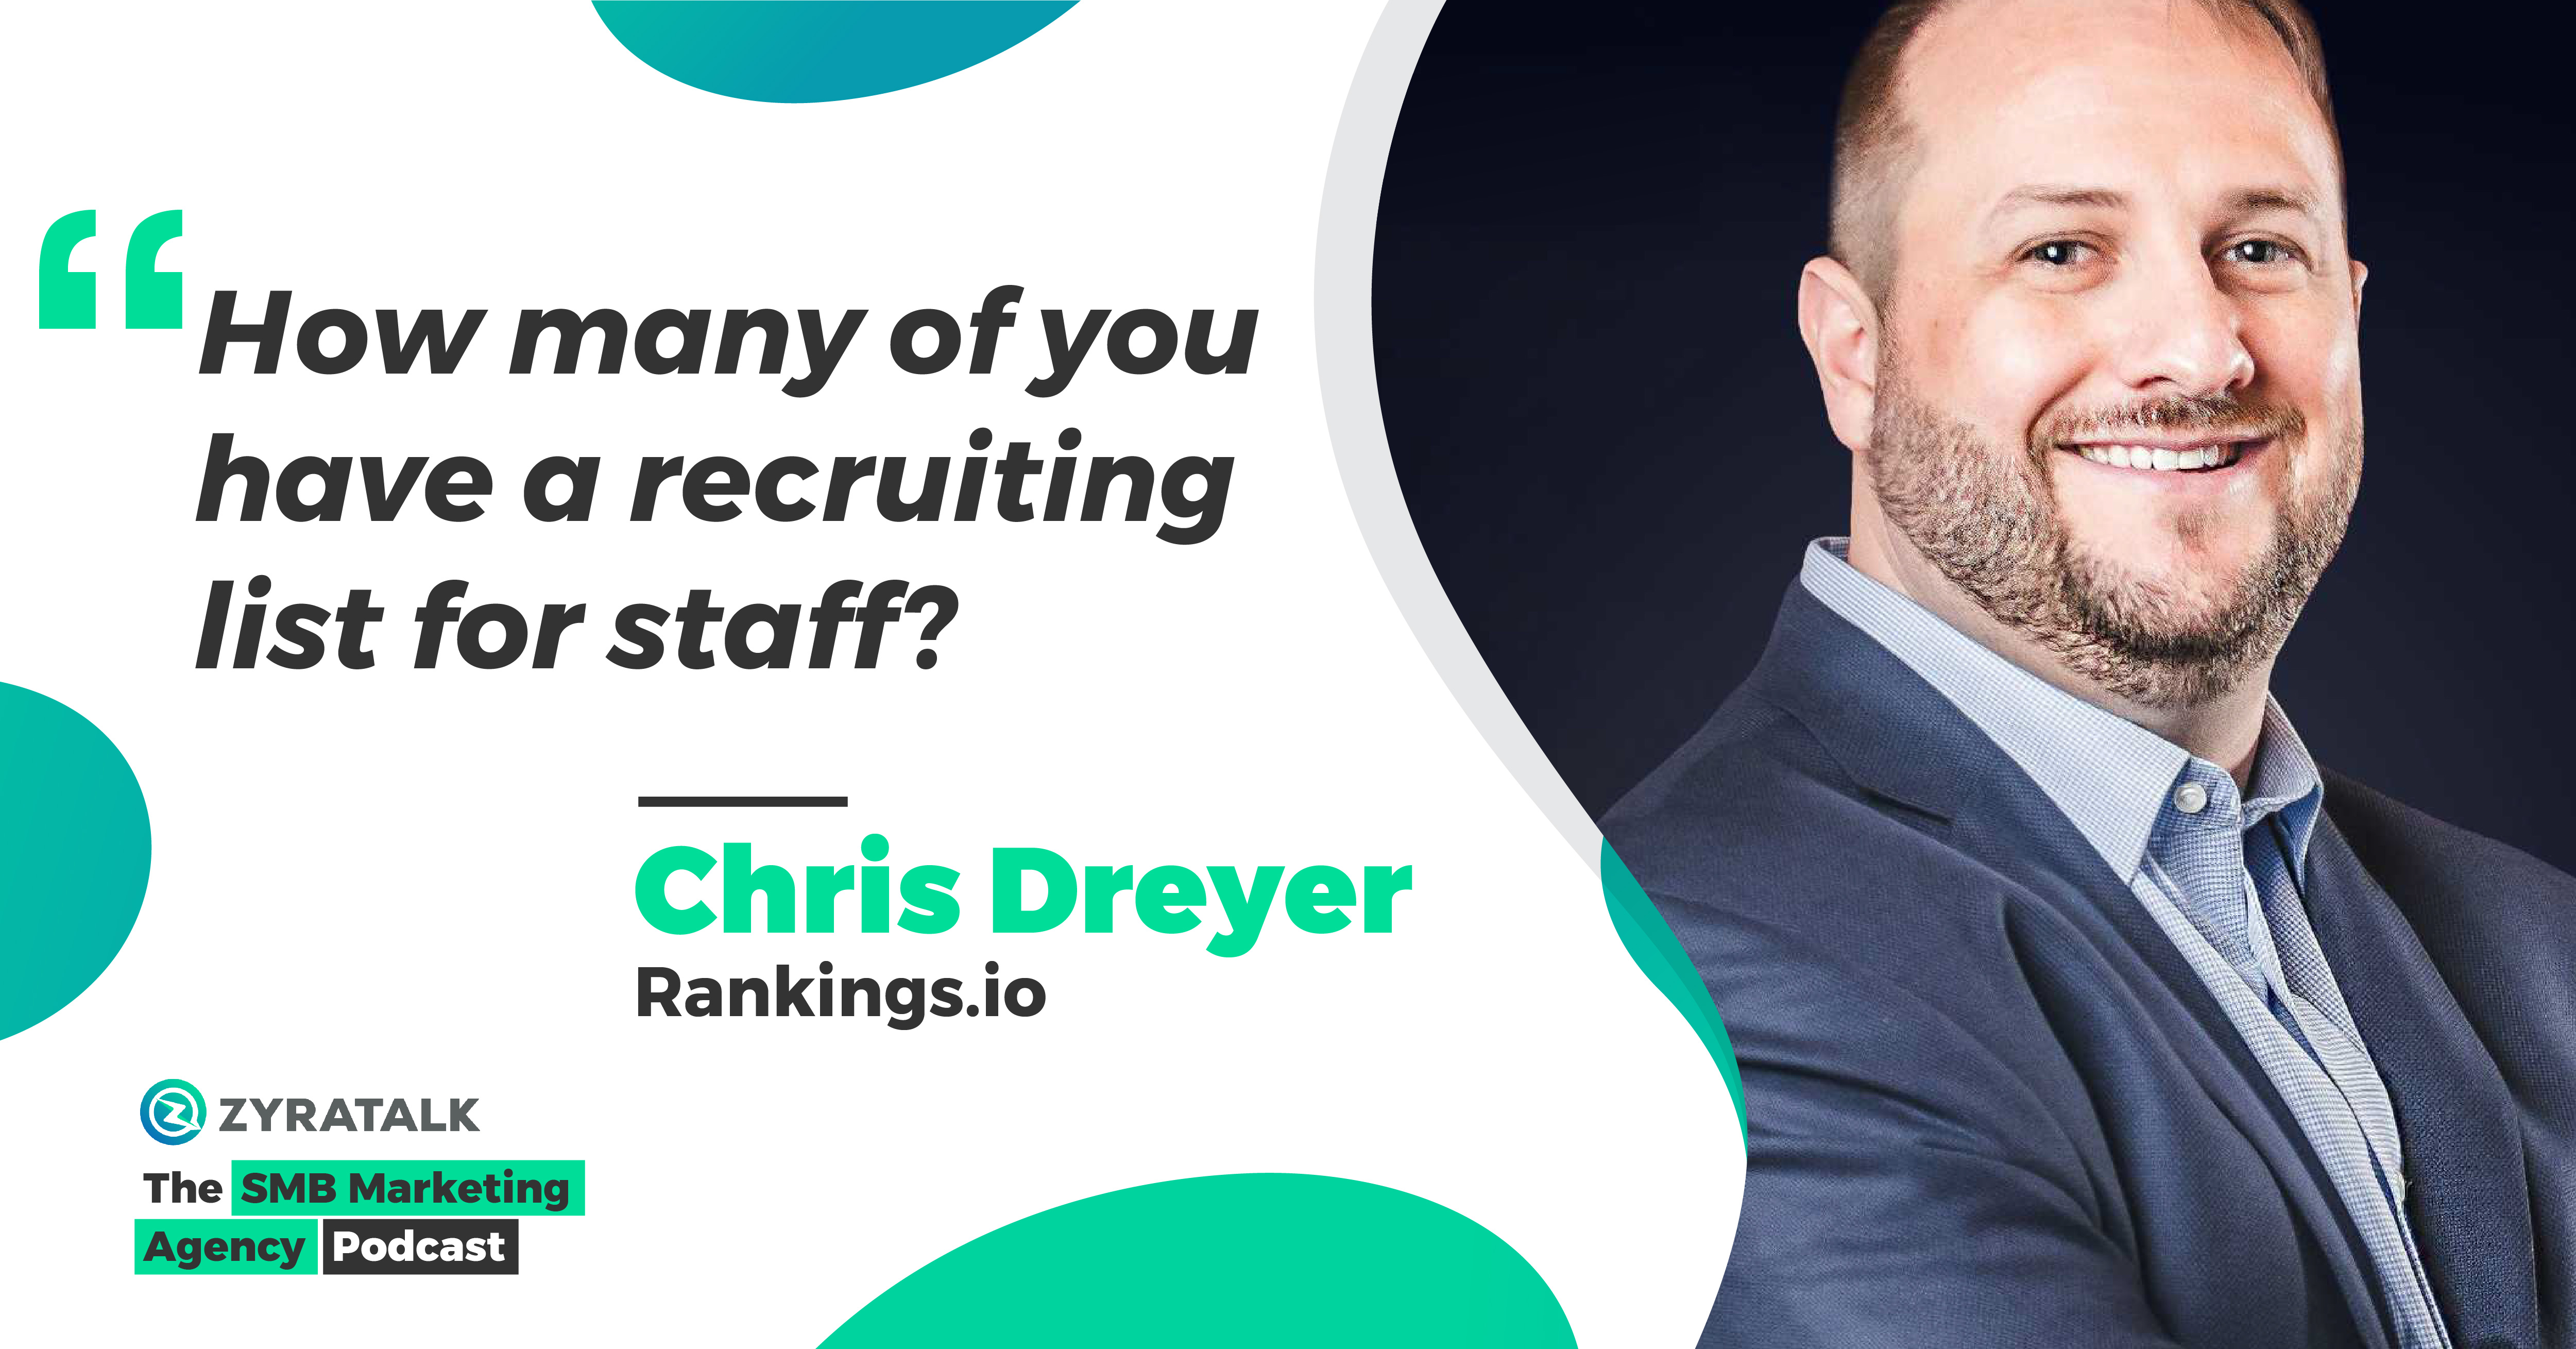 Chris Dreyer, President & Founder of Rankings.io | The SMB Marketing Agency Podcast